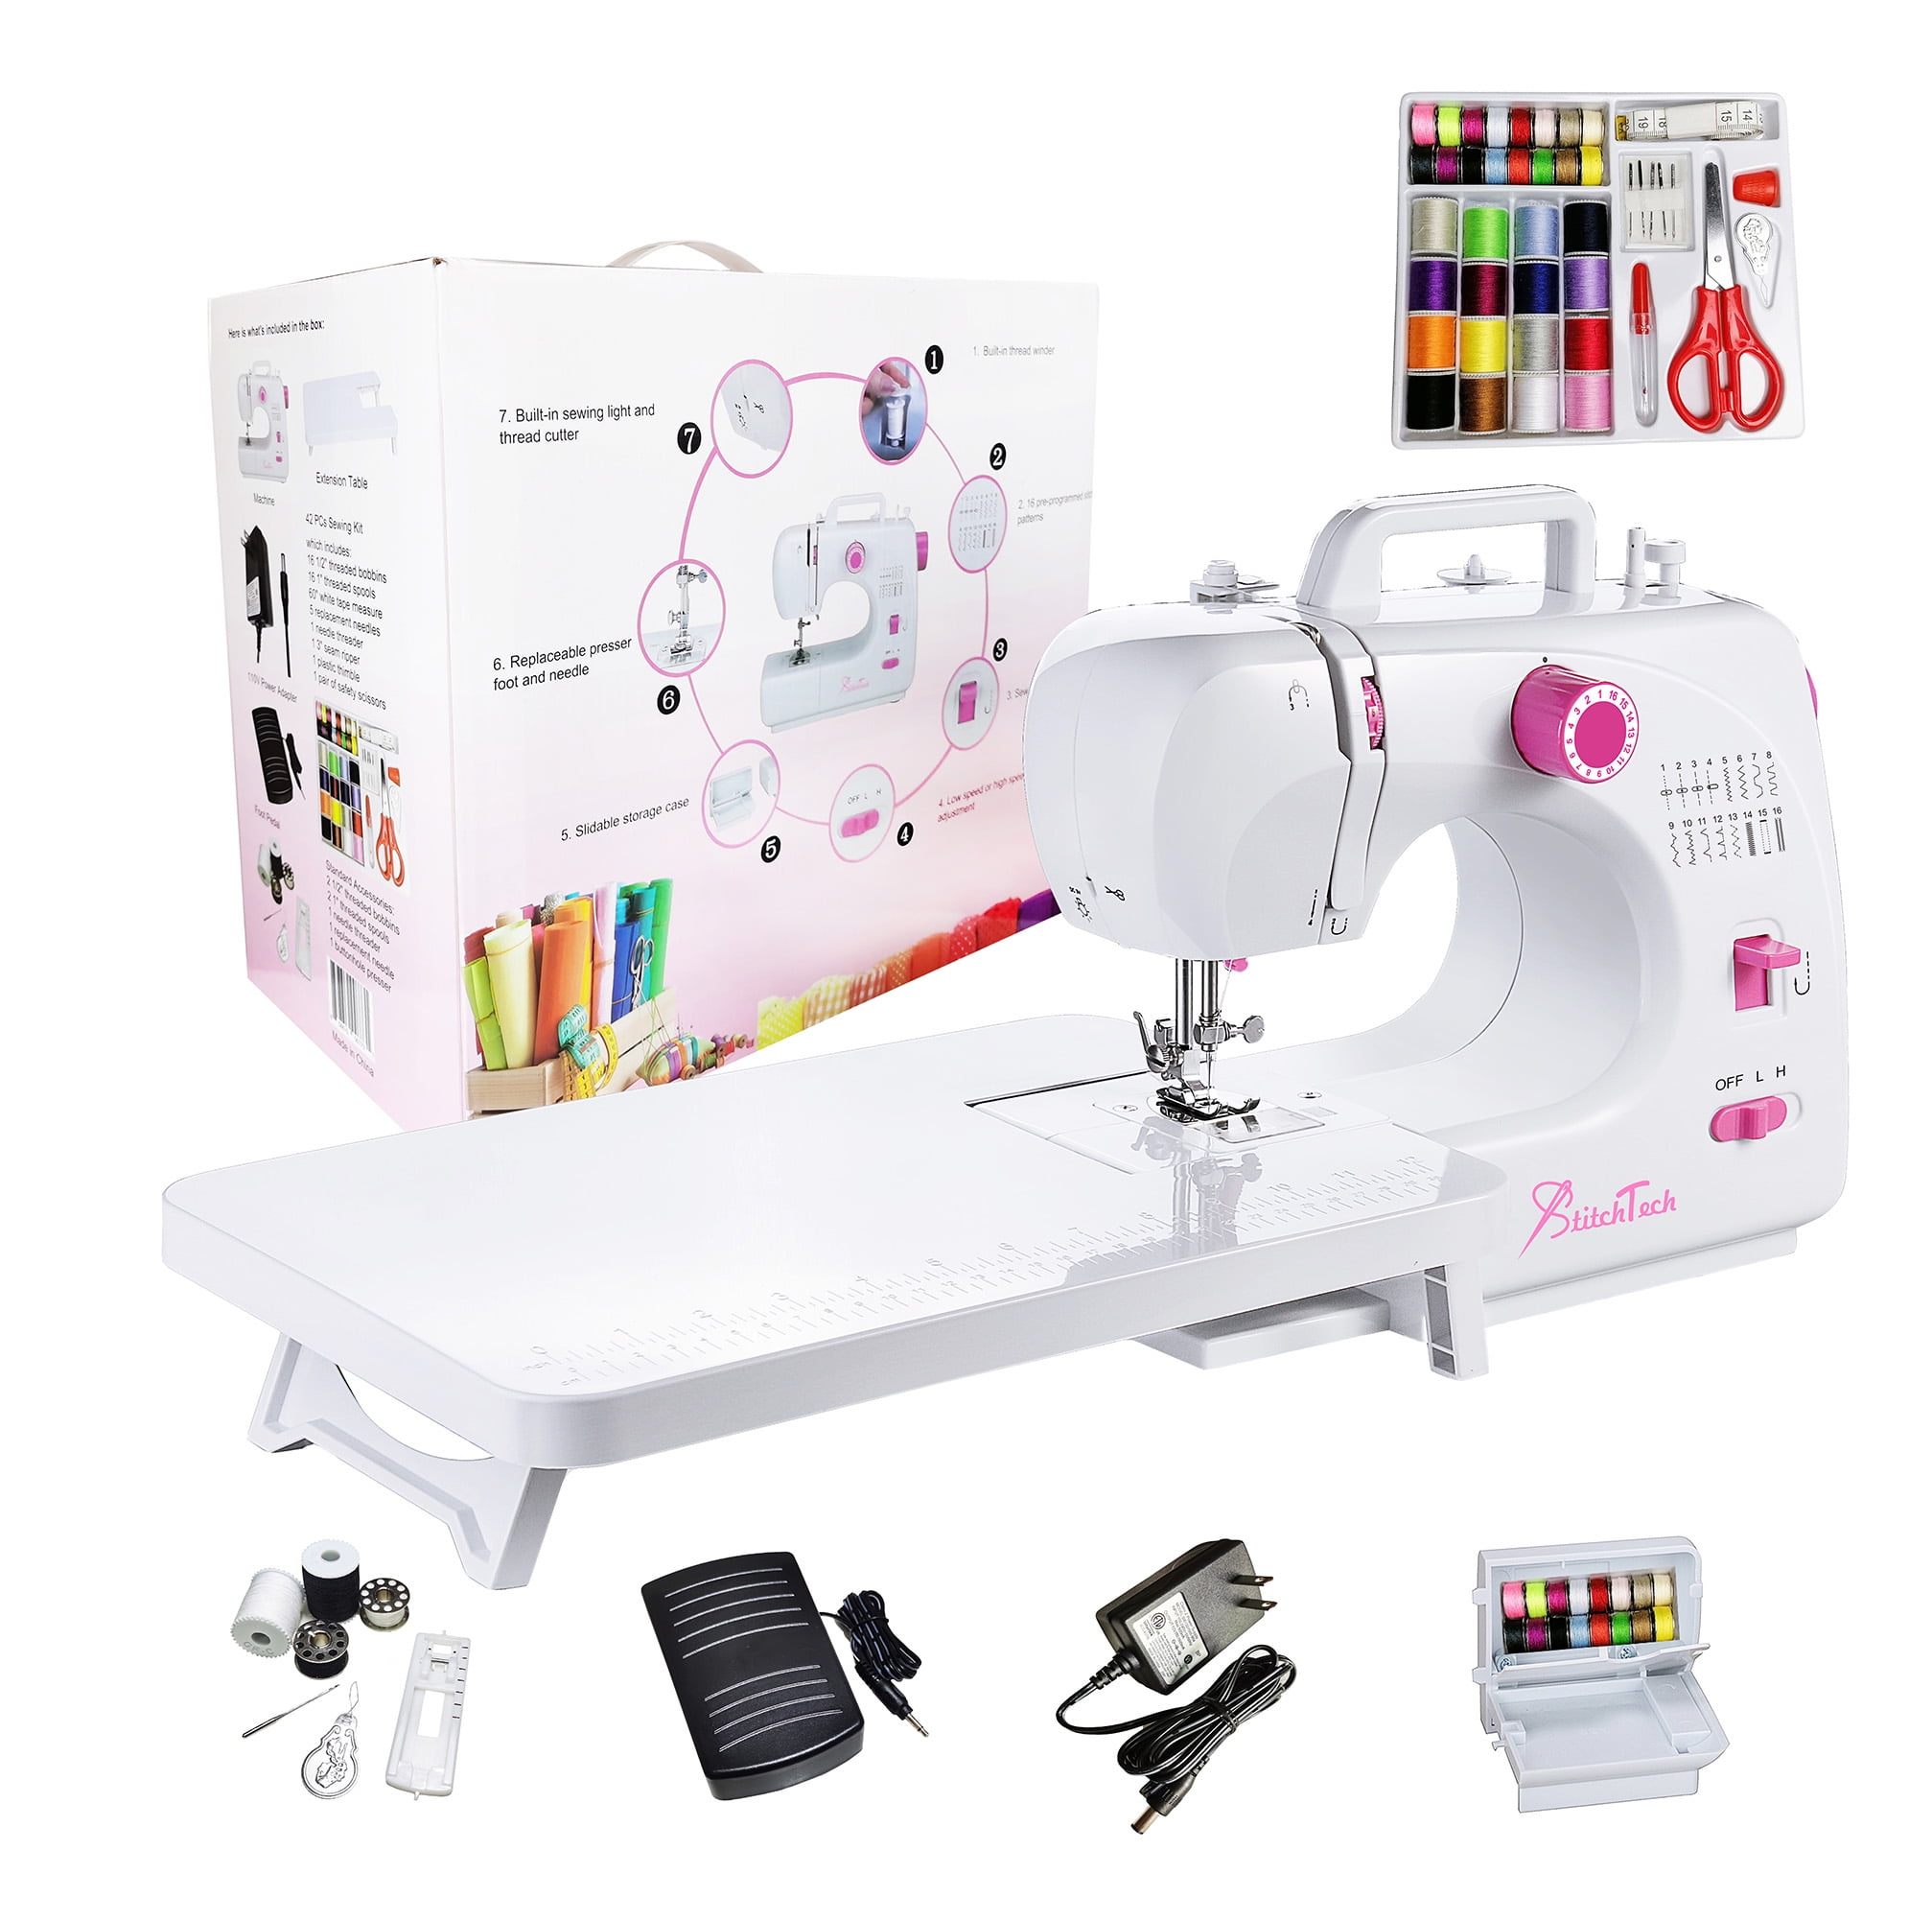 StitchTech Portable Multi-Function Home Sewing Machine 16 Built-in Stitches  Dual Spread Control Reverse Sewing with LED Light Comes with an Extension